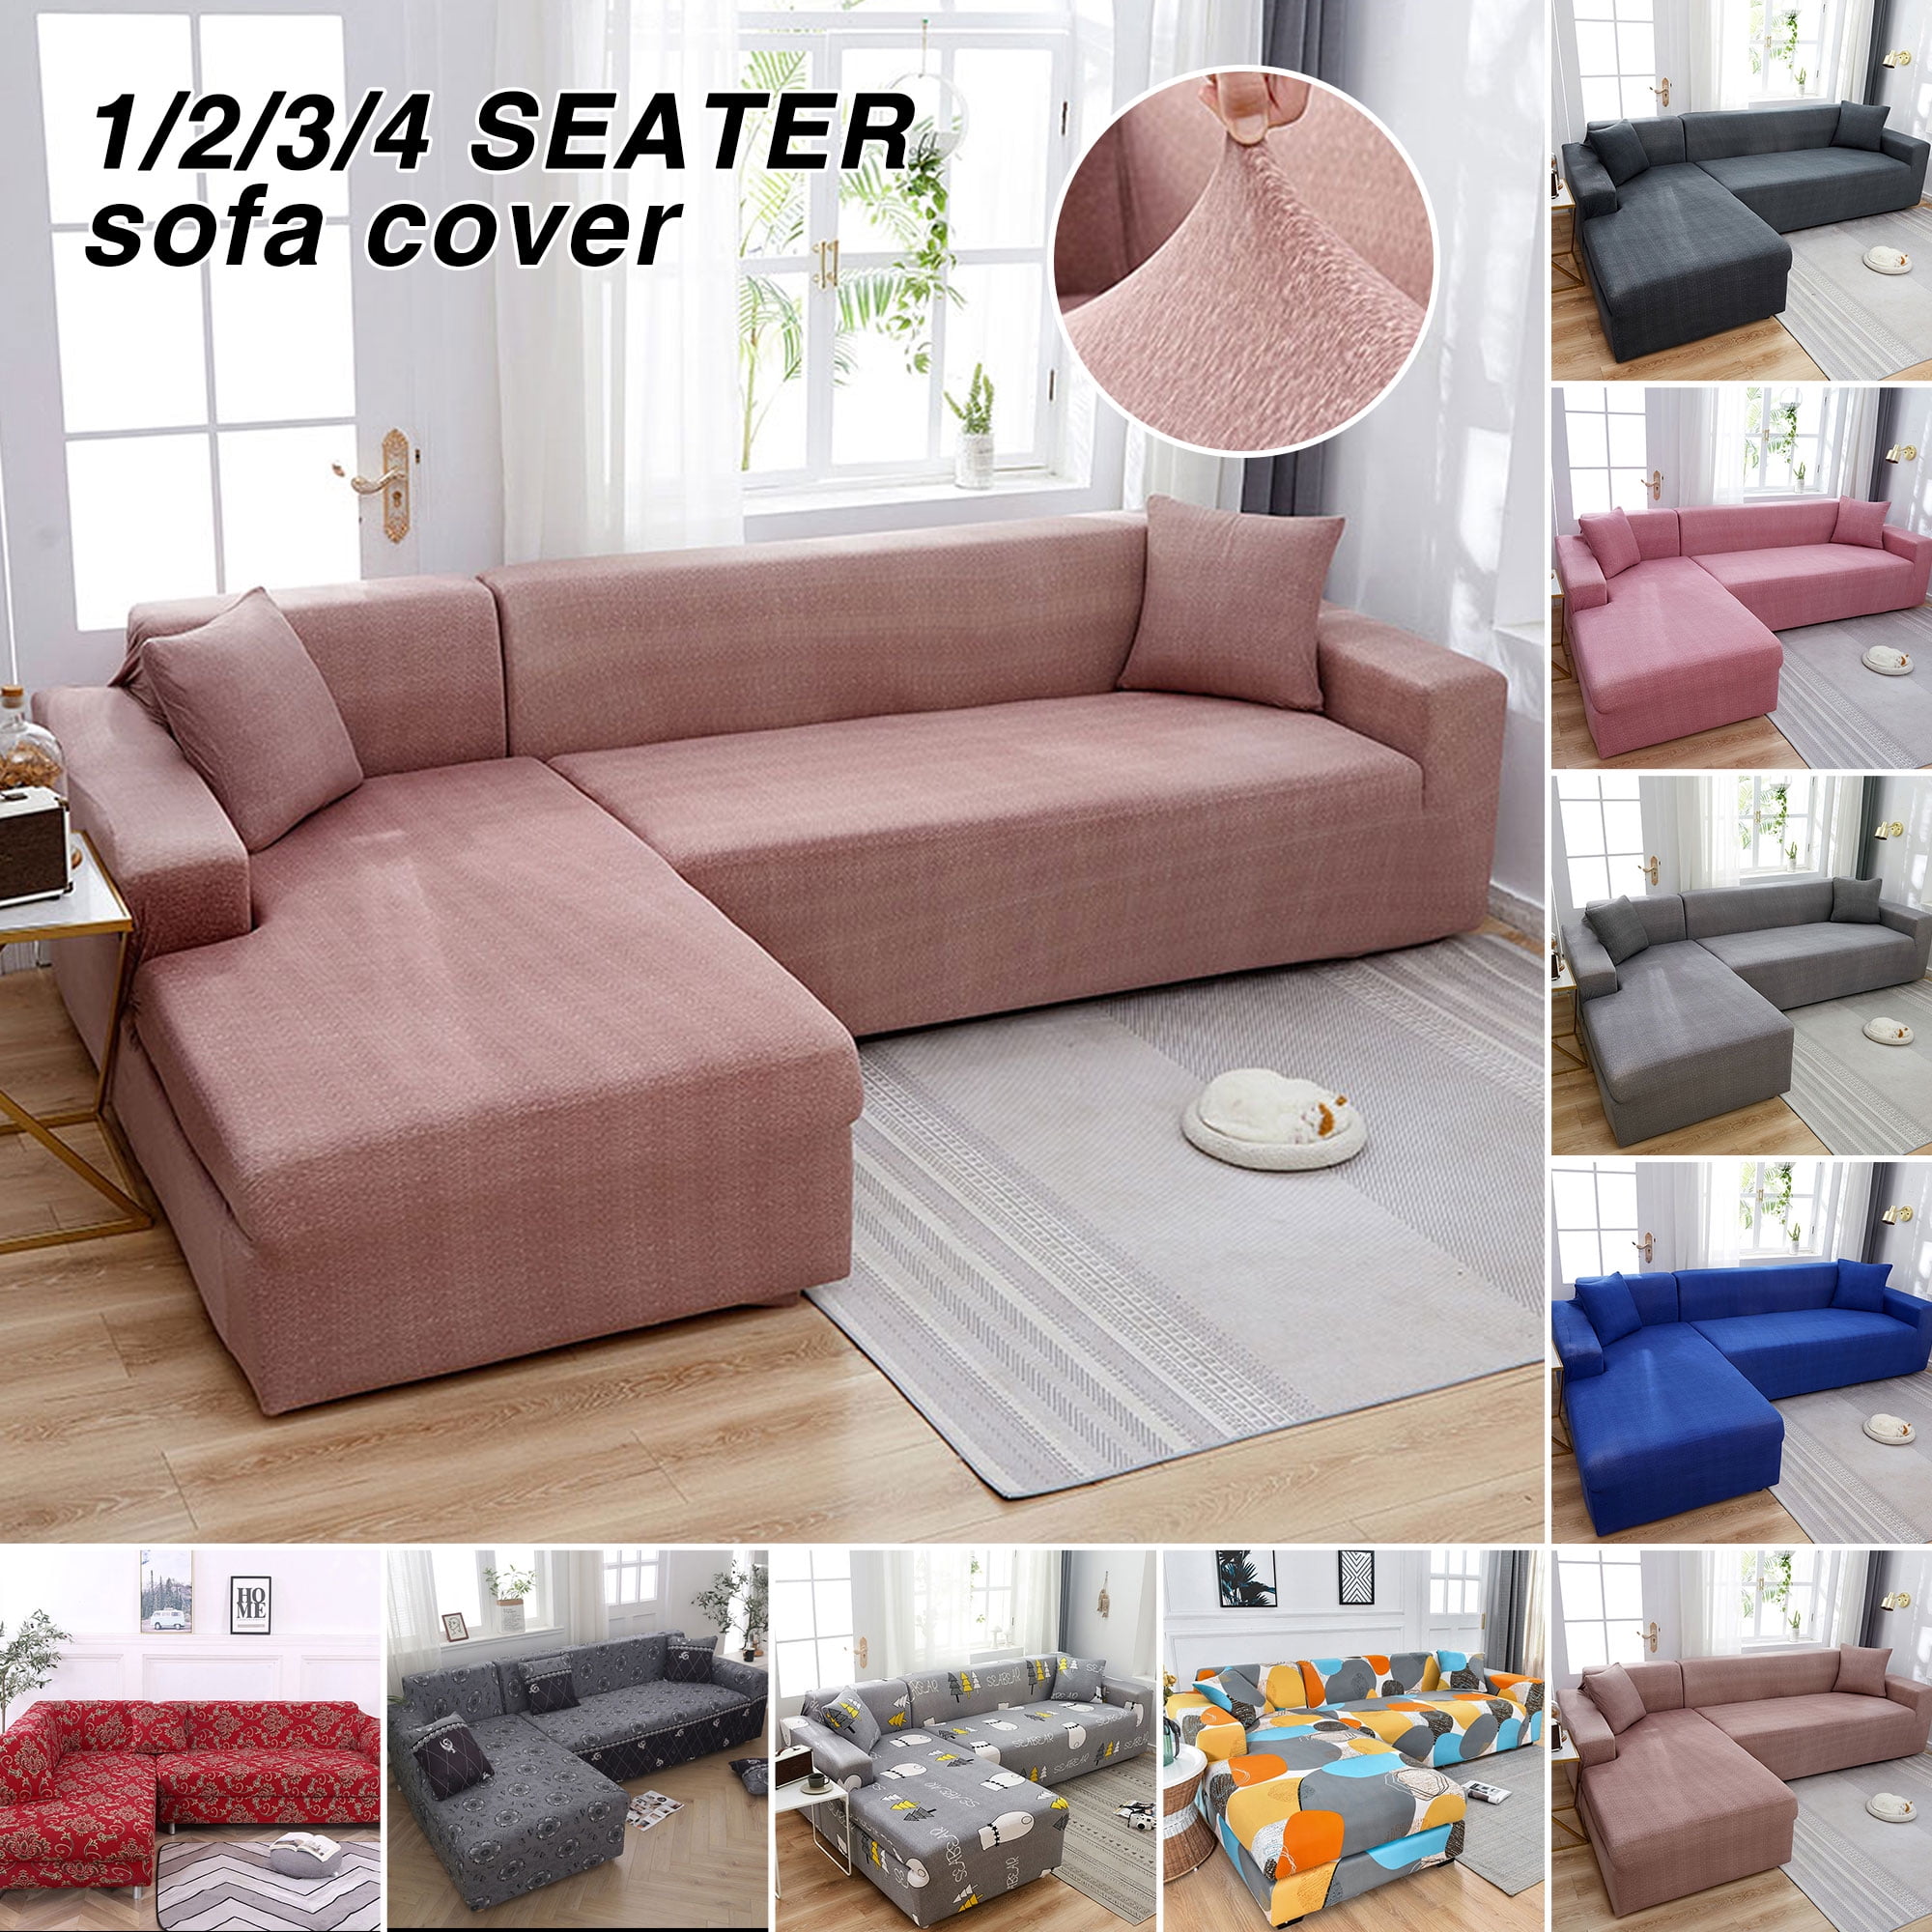 Details about   Elastic Stretch Sofa Cover 1/2/3/4 Seater Sof Slipcover Couch Covers Ectional L 